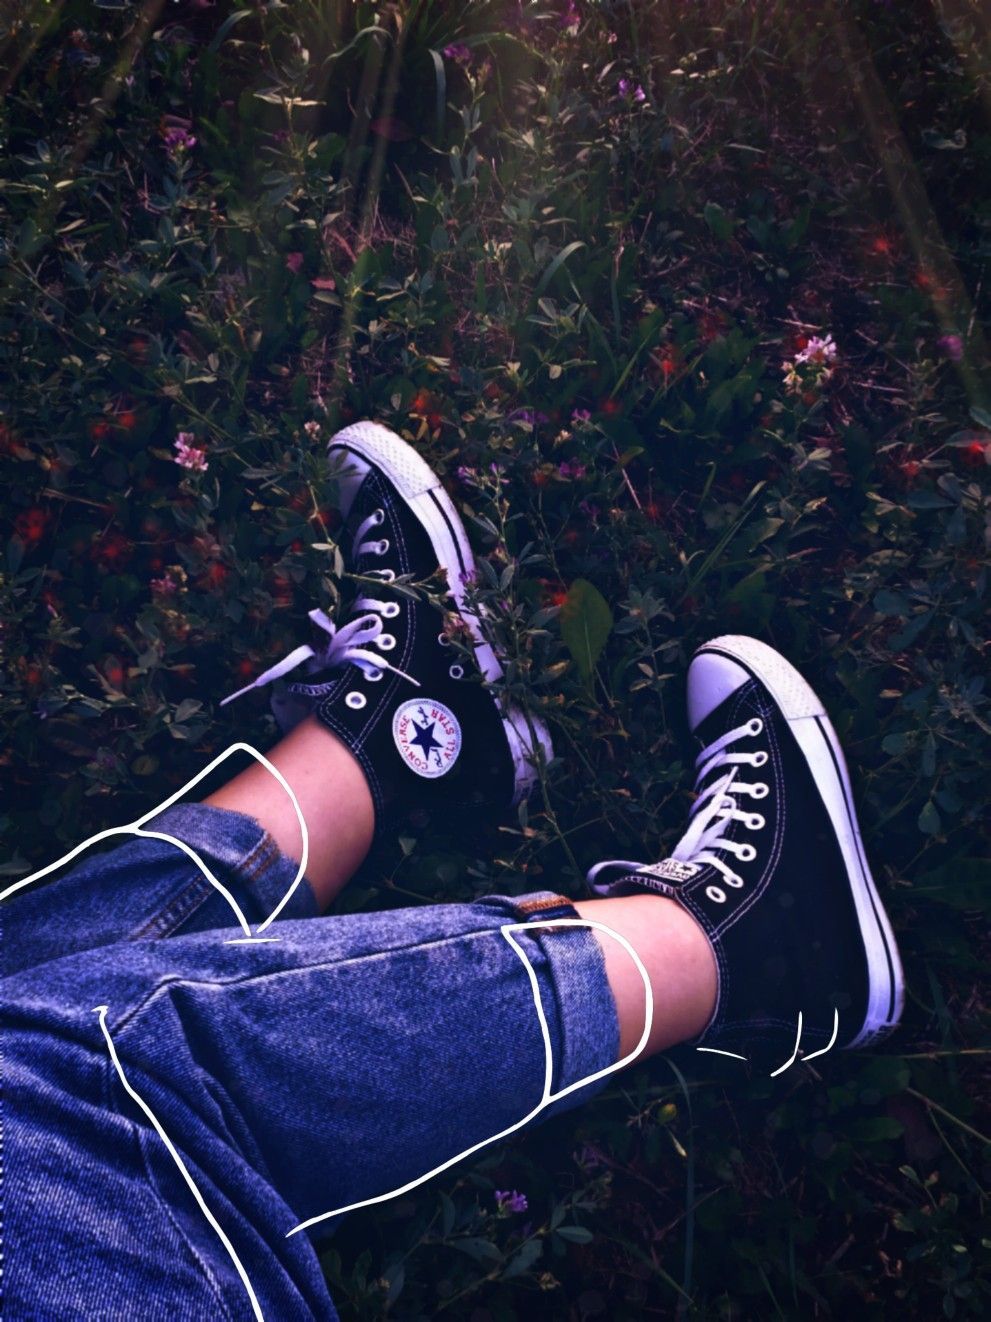 Converse. Converse aesthetic, Aesthetic shoes, Skirt and sneakers